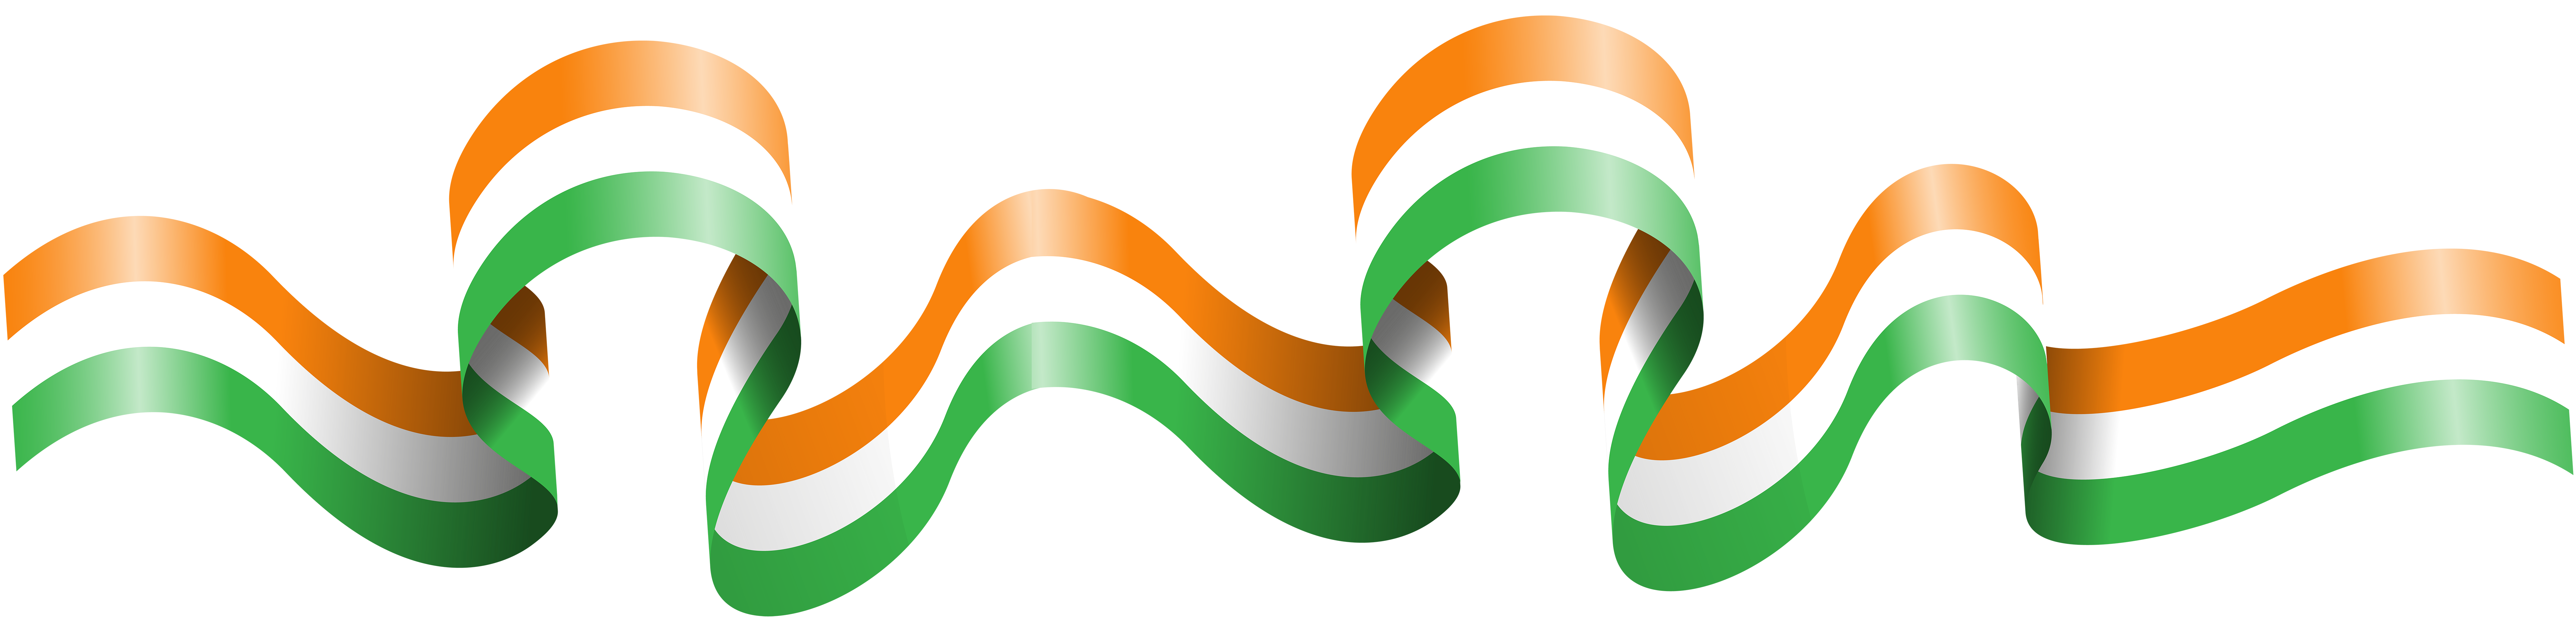 India Flag Ribbon Png Clipart Gallery Yopriceville High Quality Images And Transparent Png Free Clipart